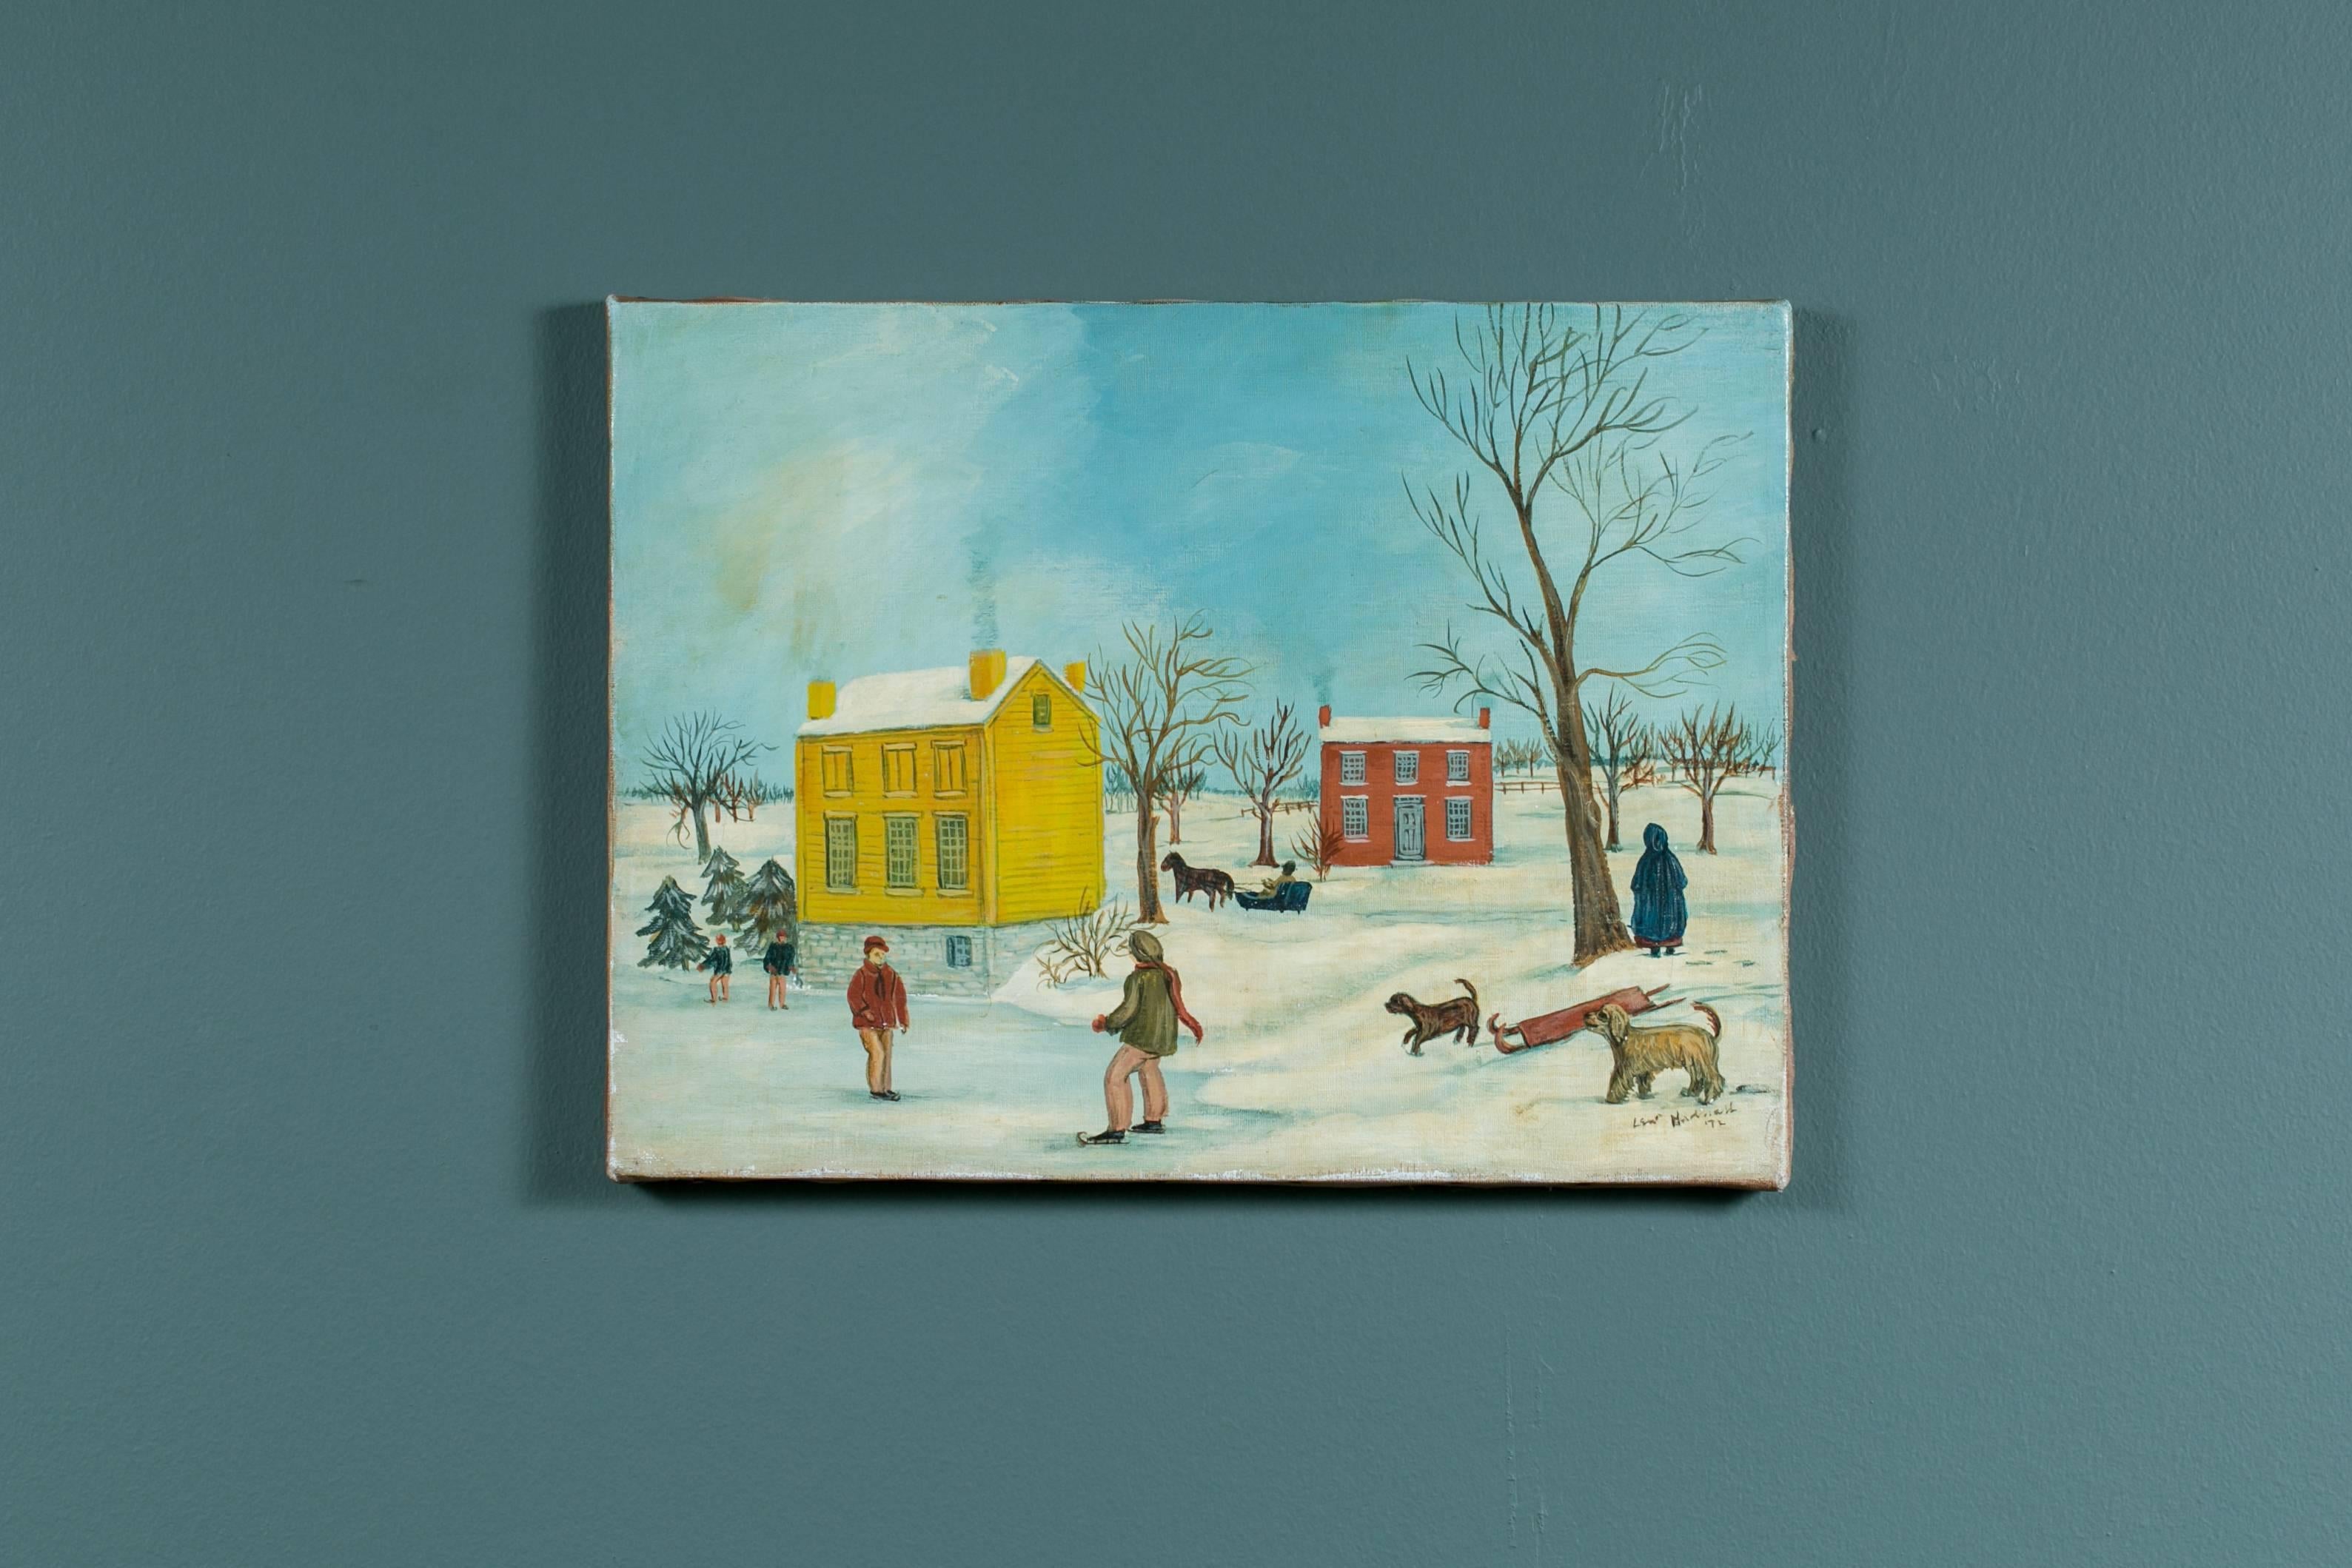 Hand-Painted Original Snow Scene Painting on Canvas by American Folk Artist Lew Hudnall